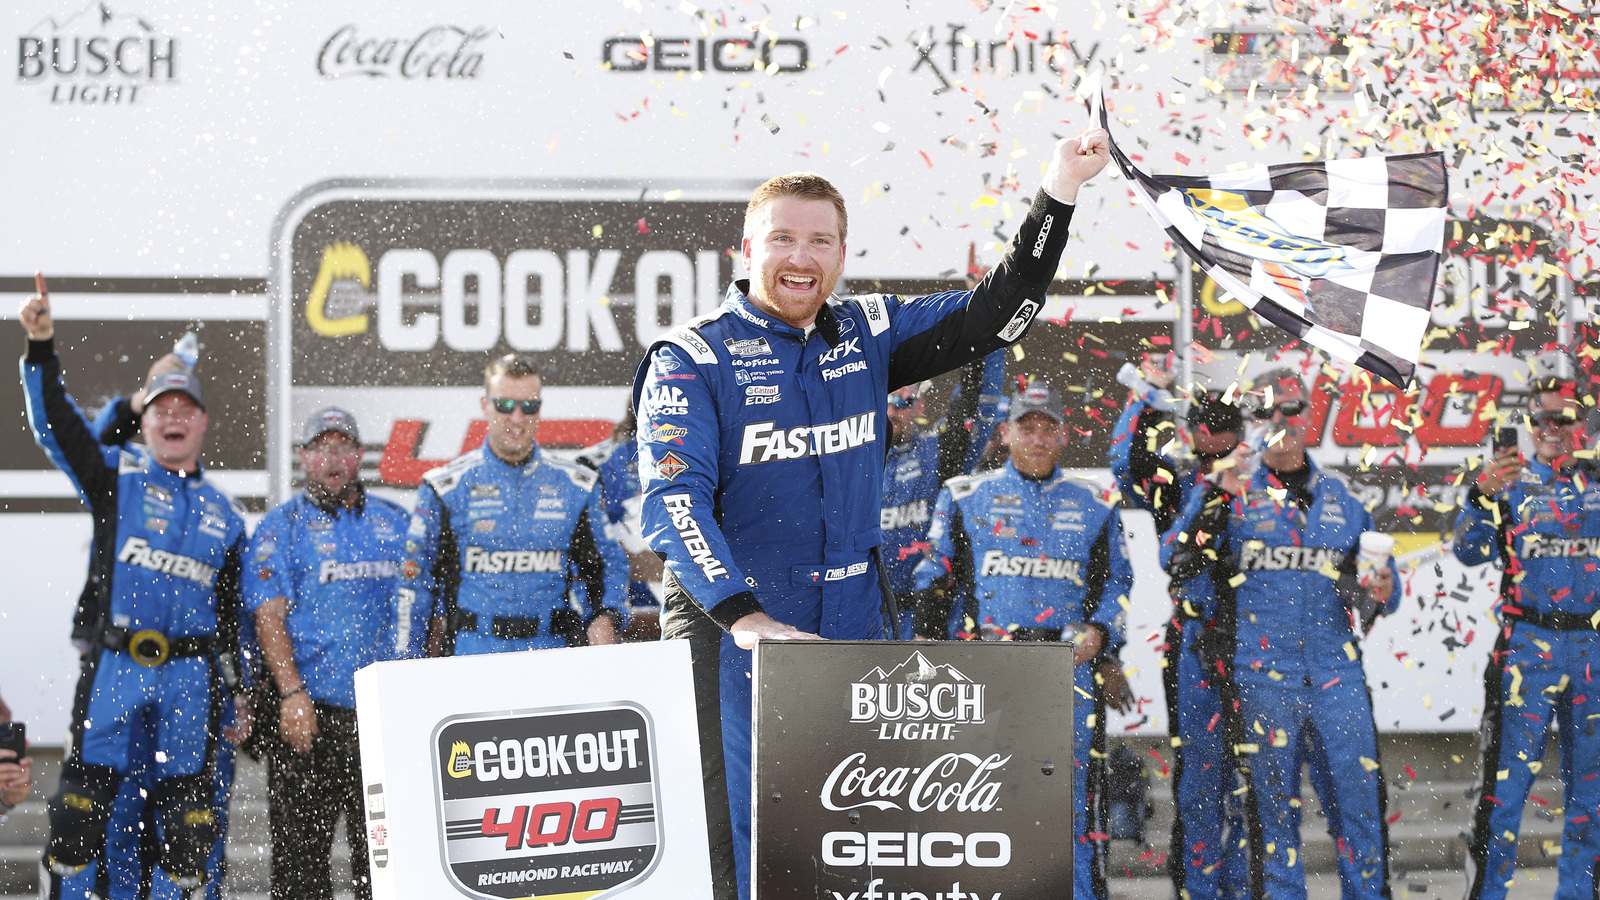 Buescher goes back-to-back with dramatic Cup victory at Michigan